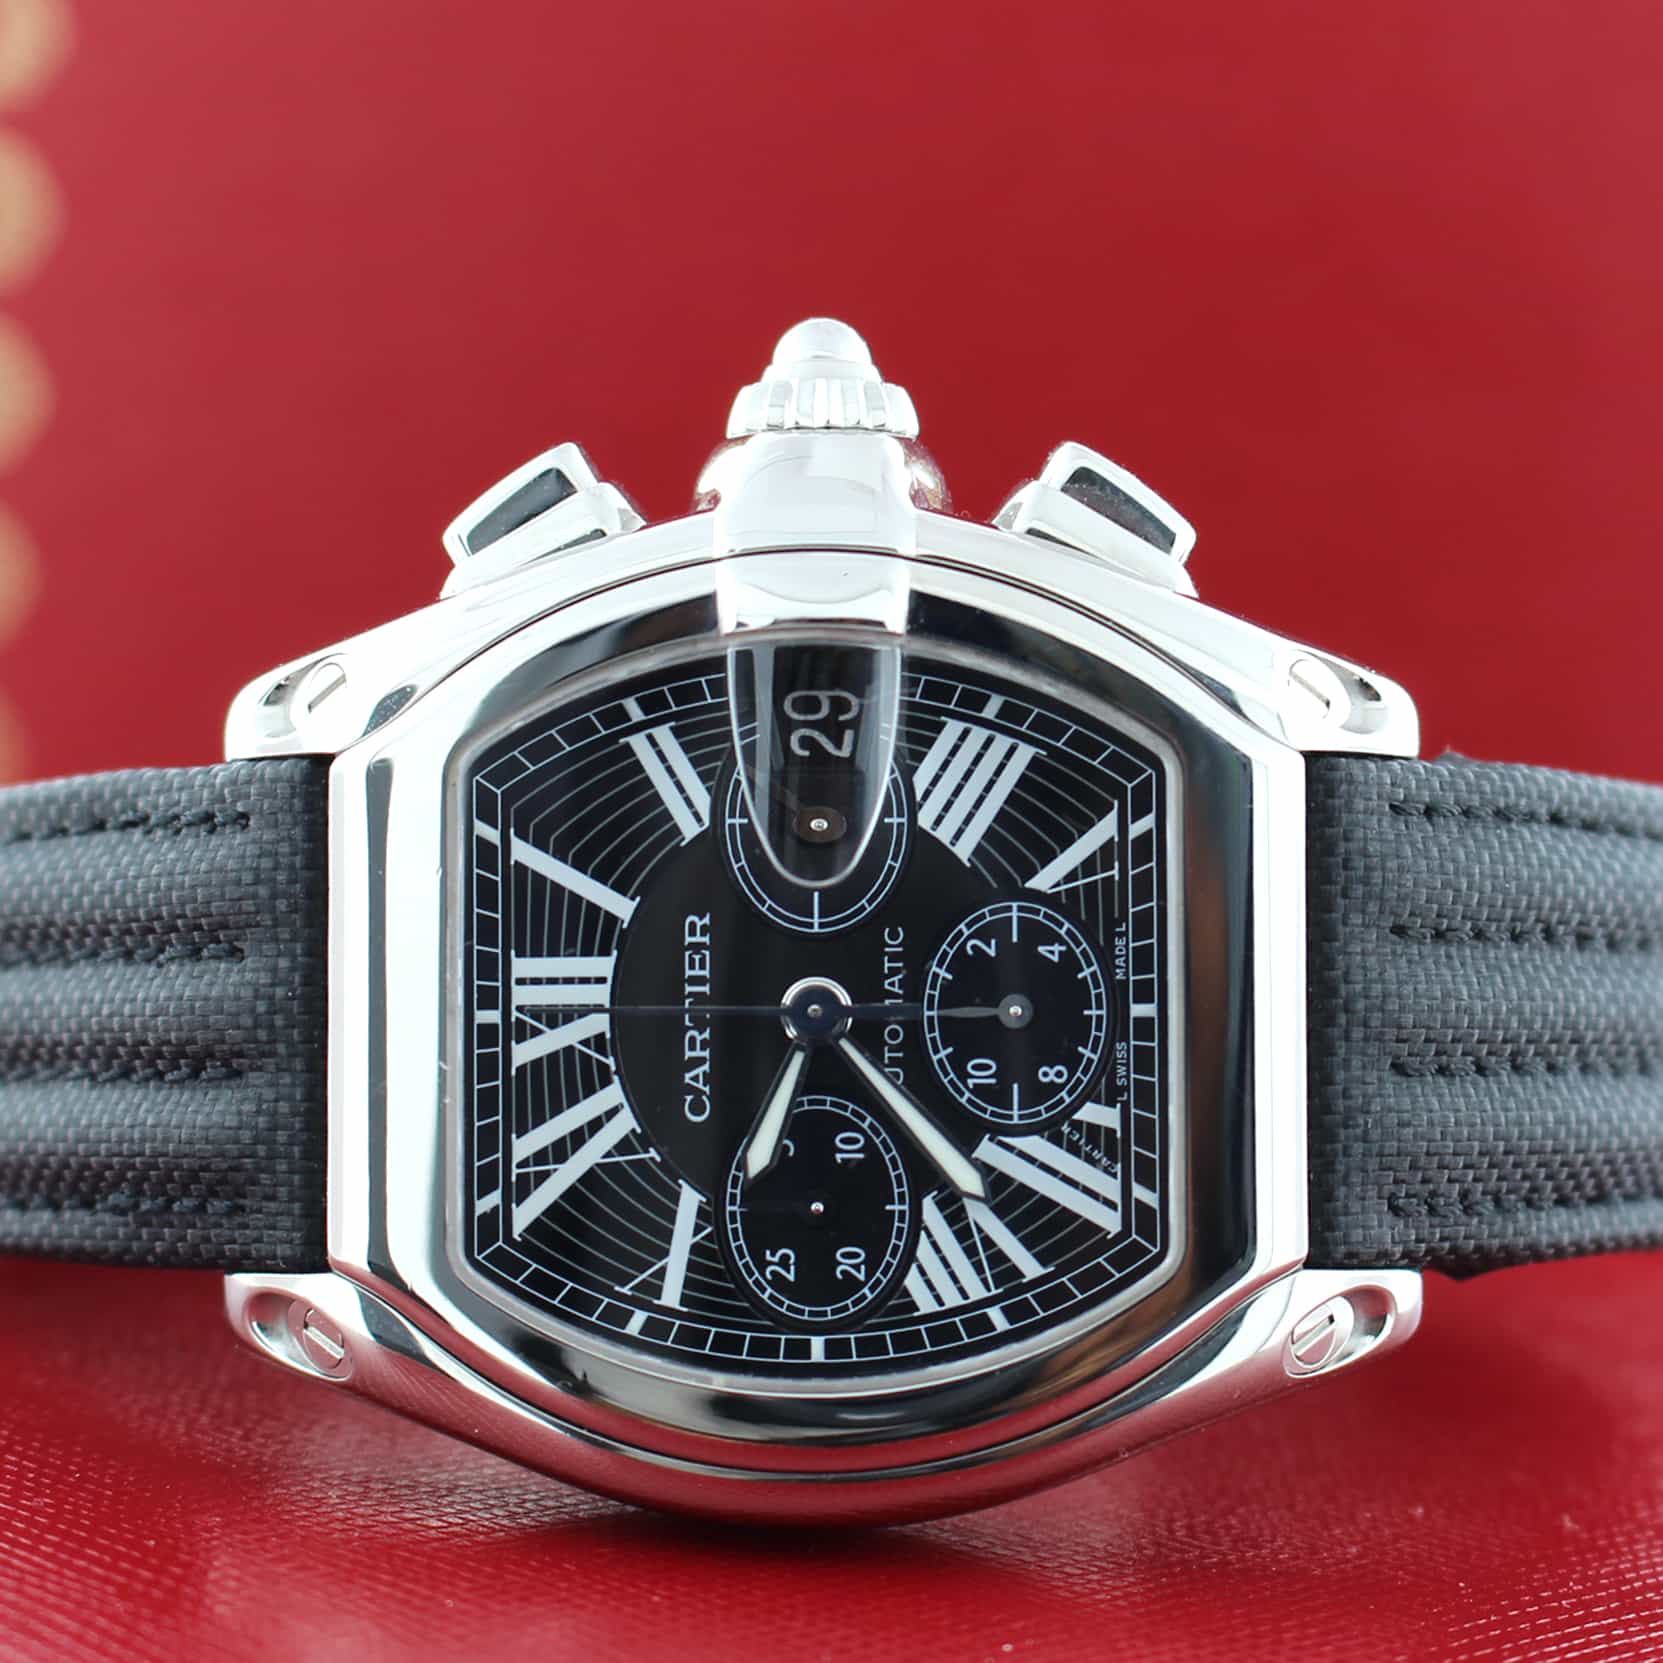 cartier roadster extra large chronograph